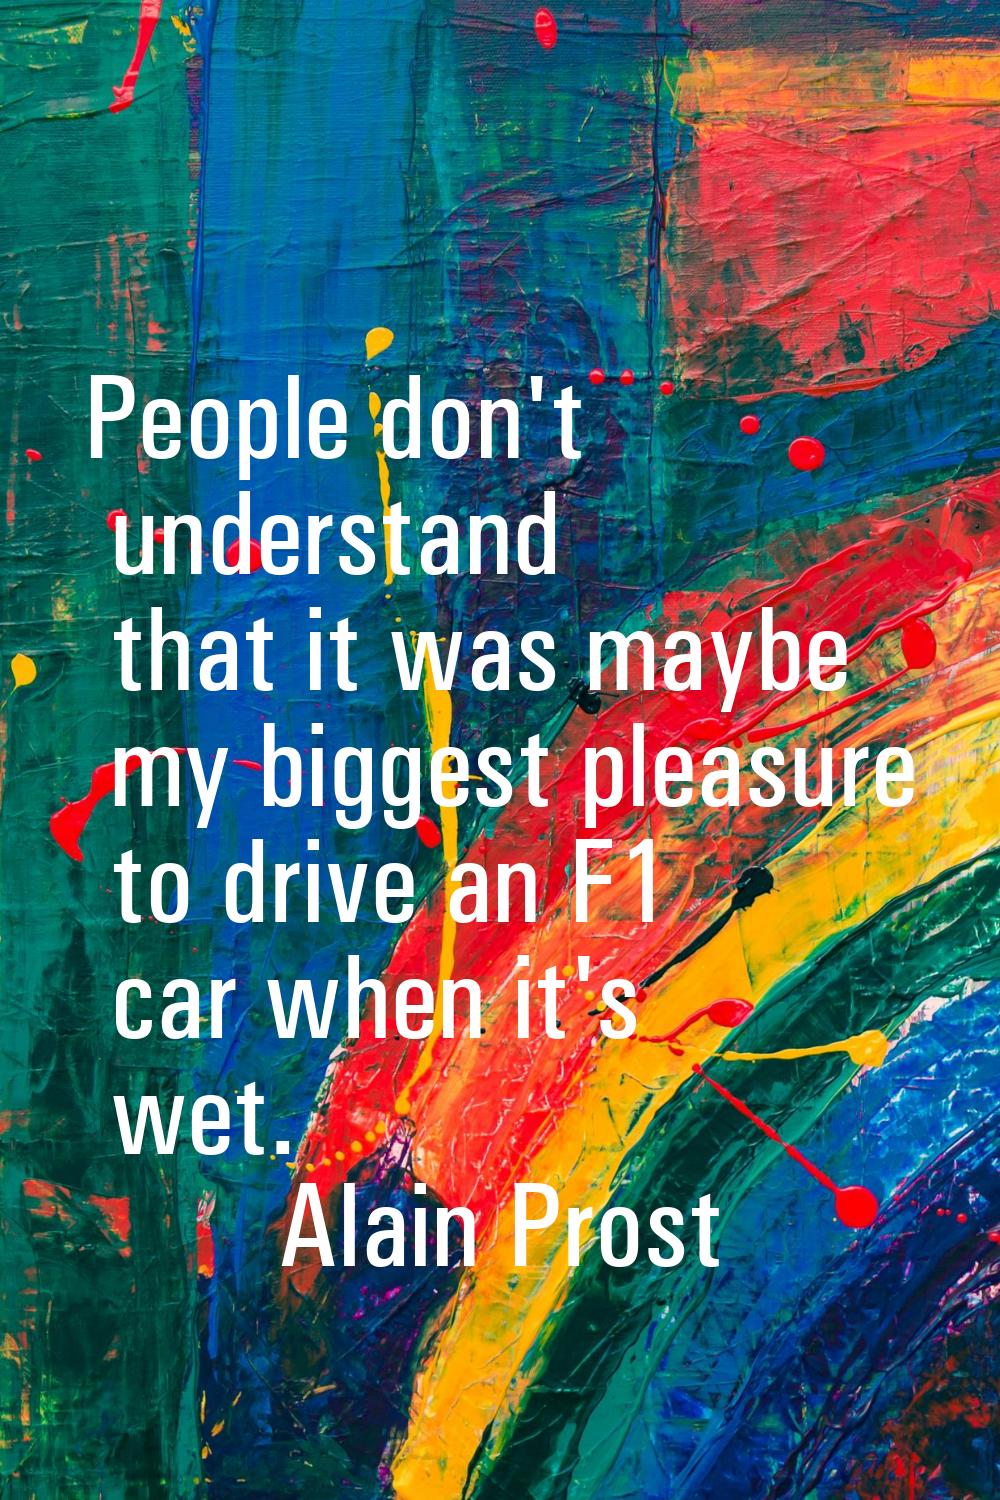 People don't understand that it was maybe my biggest pleasure to drive an F1 car when it's wet.